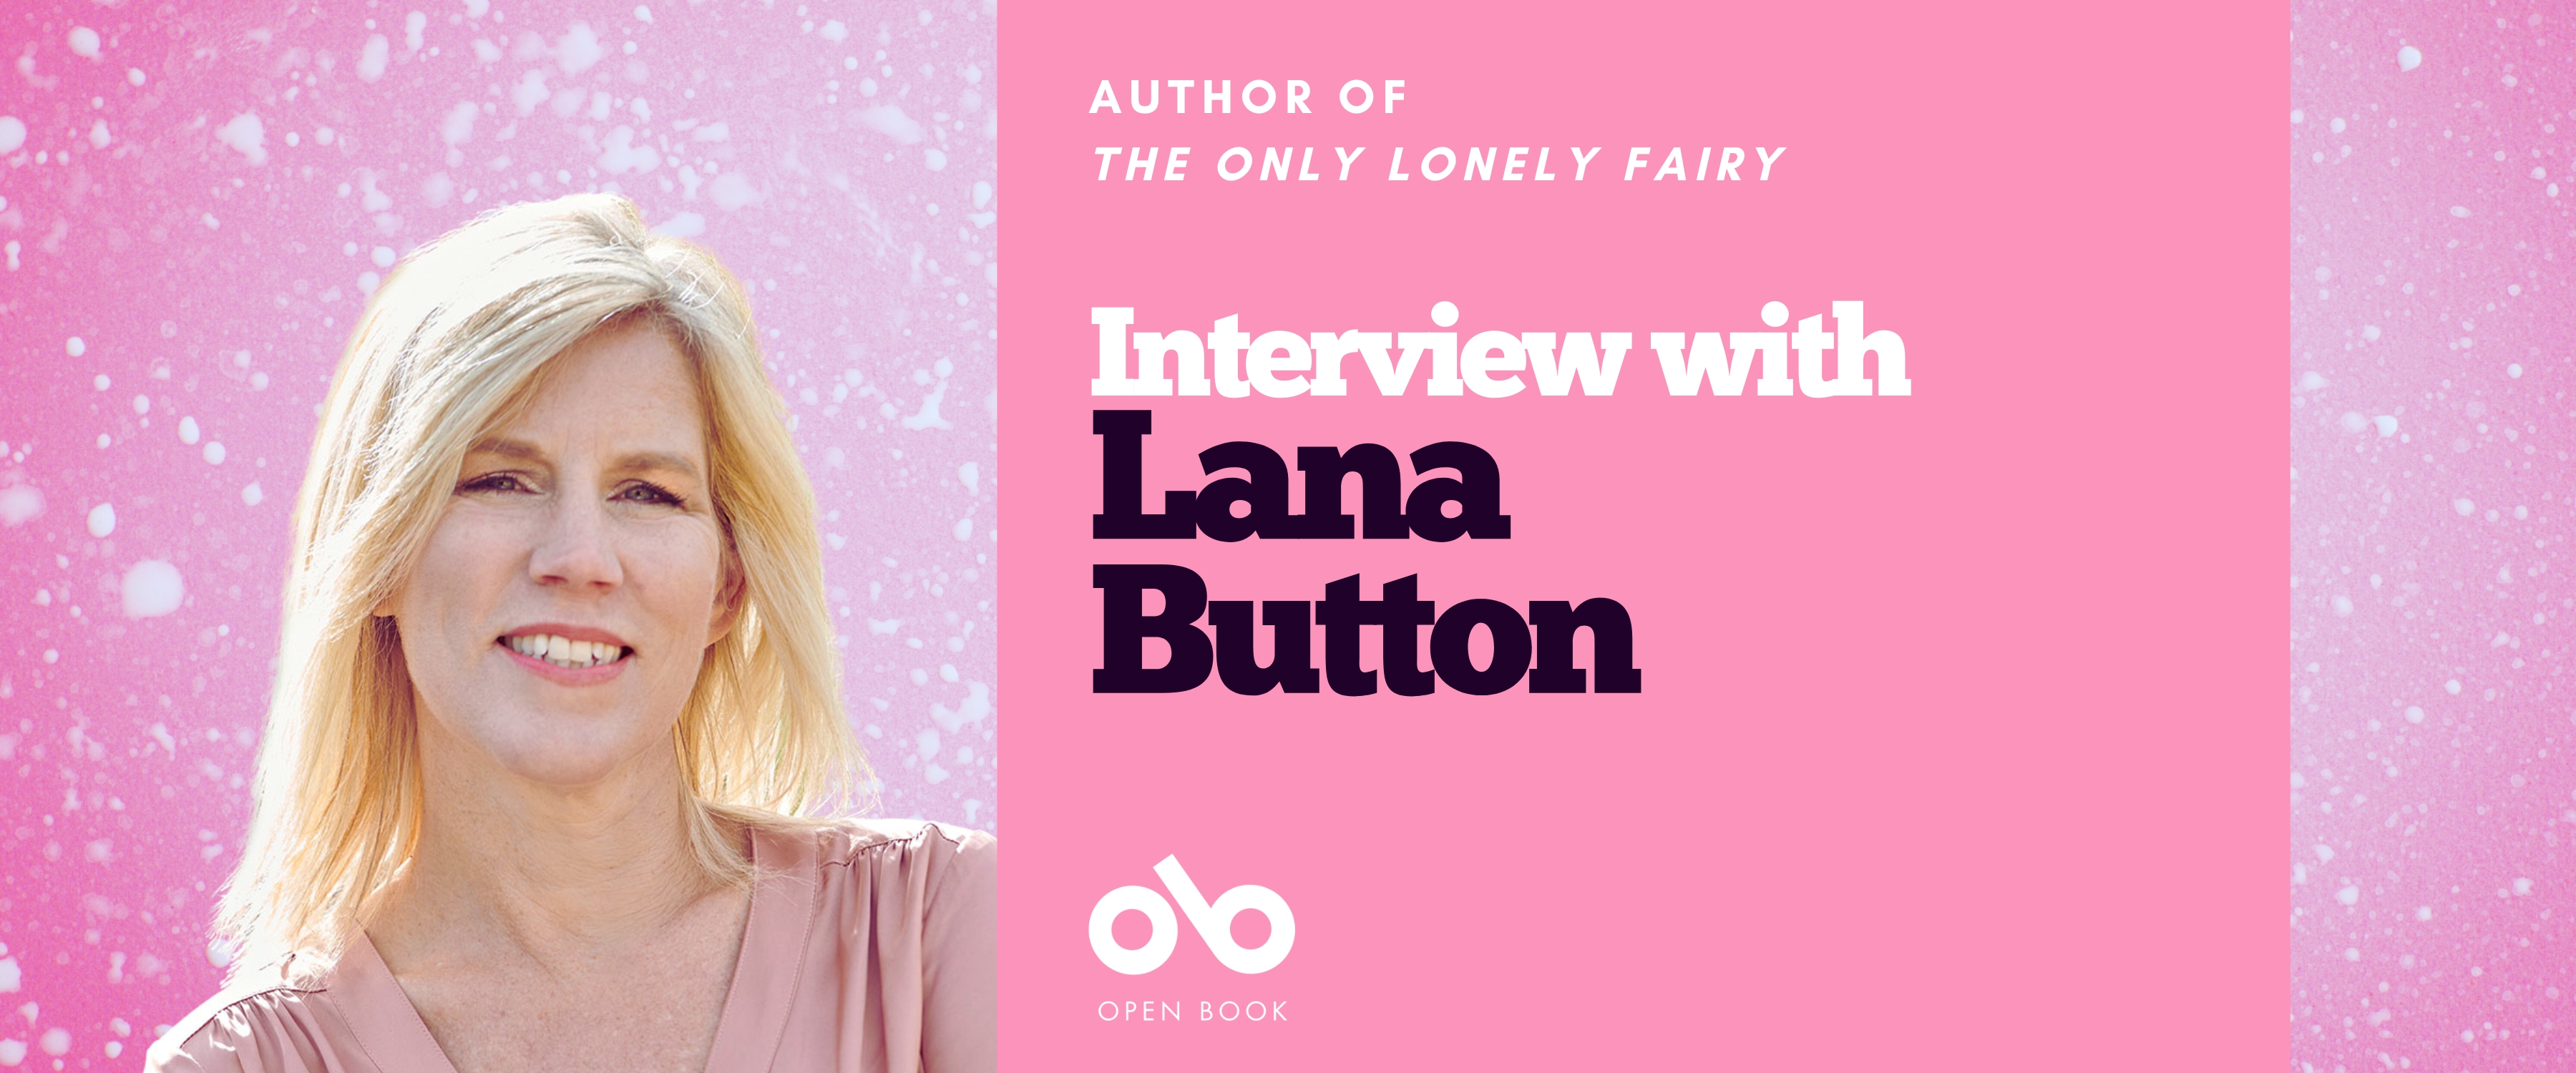 Interview with Lana Button, text over pink background bordered by vibrant texture and author photo